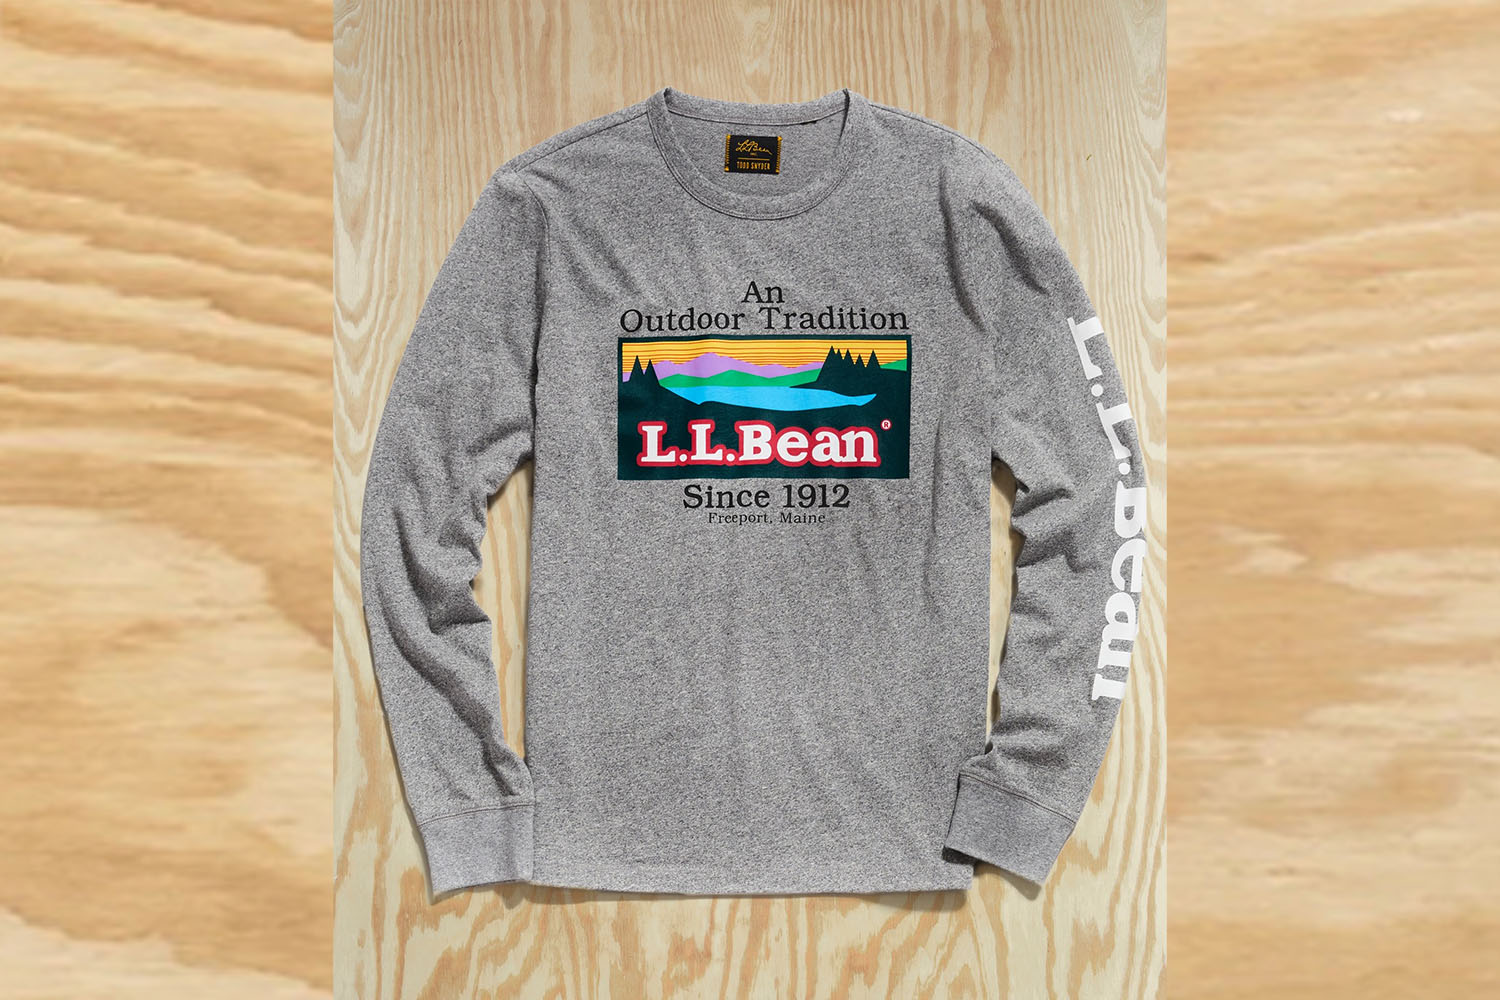 a Todd Snyder x L.L. Bean Tee on a wooden background